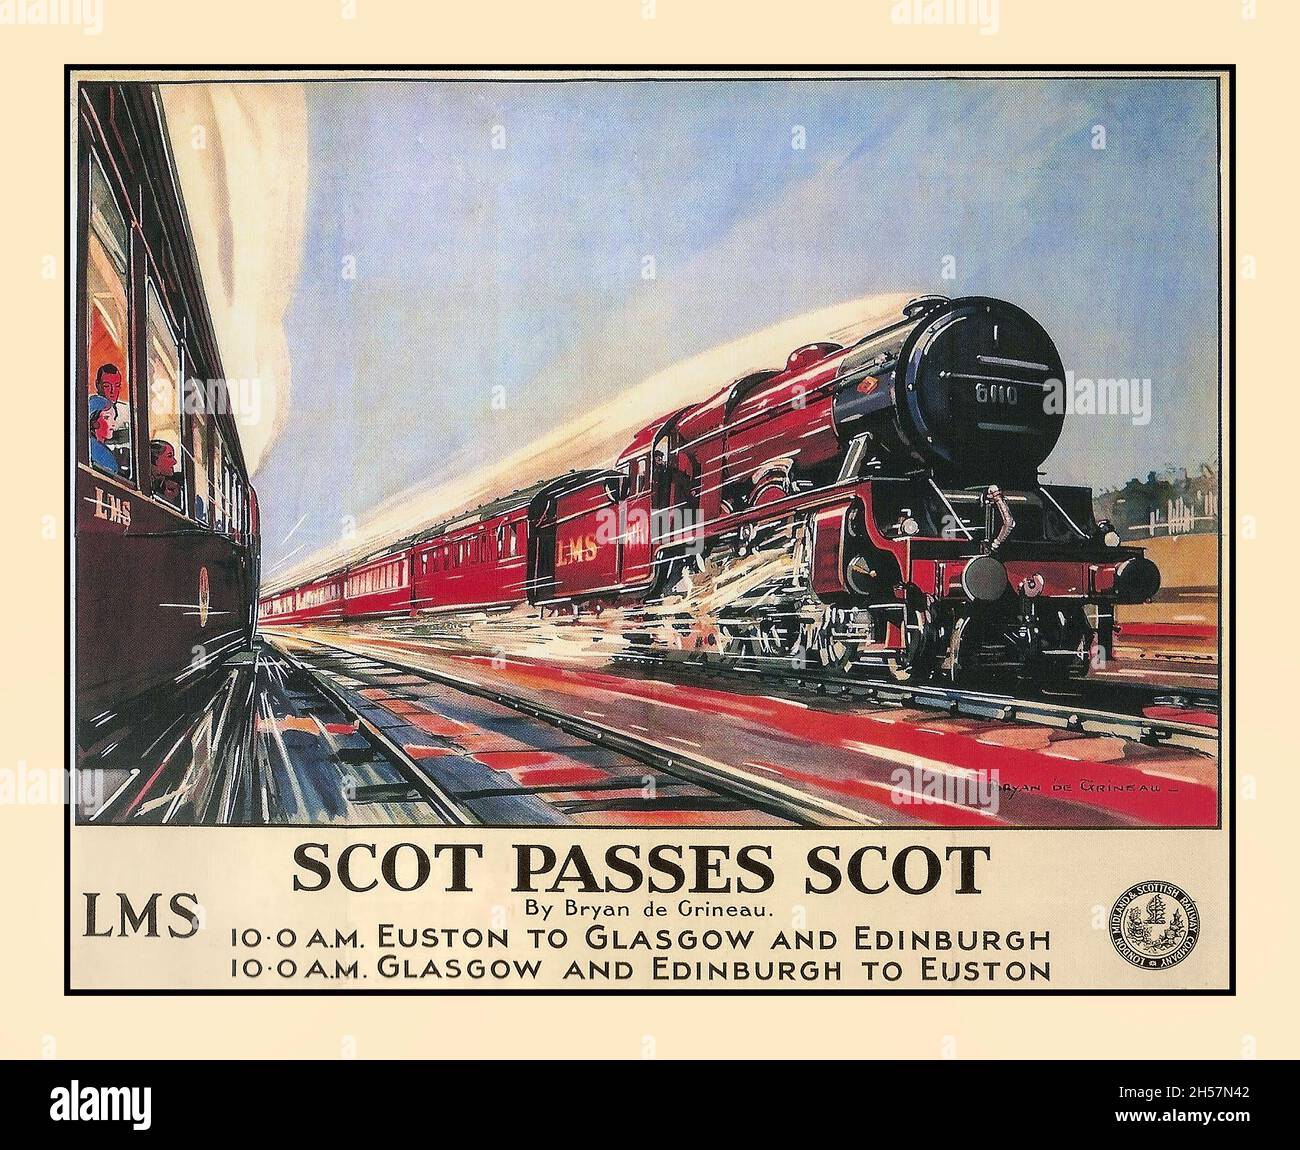 Vintage ‘SCOT PASSES SCOT’ 1937 Steam Railway Poster by Bryan de Grineau who created the artwork for this 1937 vintage steam railway poster. It features two red LMS steam locomotives passing one another at high speed, produced for London Midland & Scottish Railway (LMS) to promote services between Edinburgh, Glasgow and London Euston stations. Stock Photo